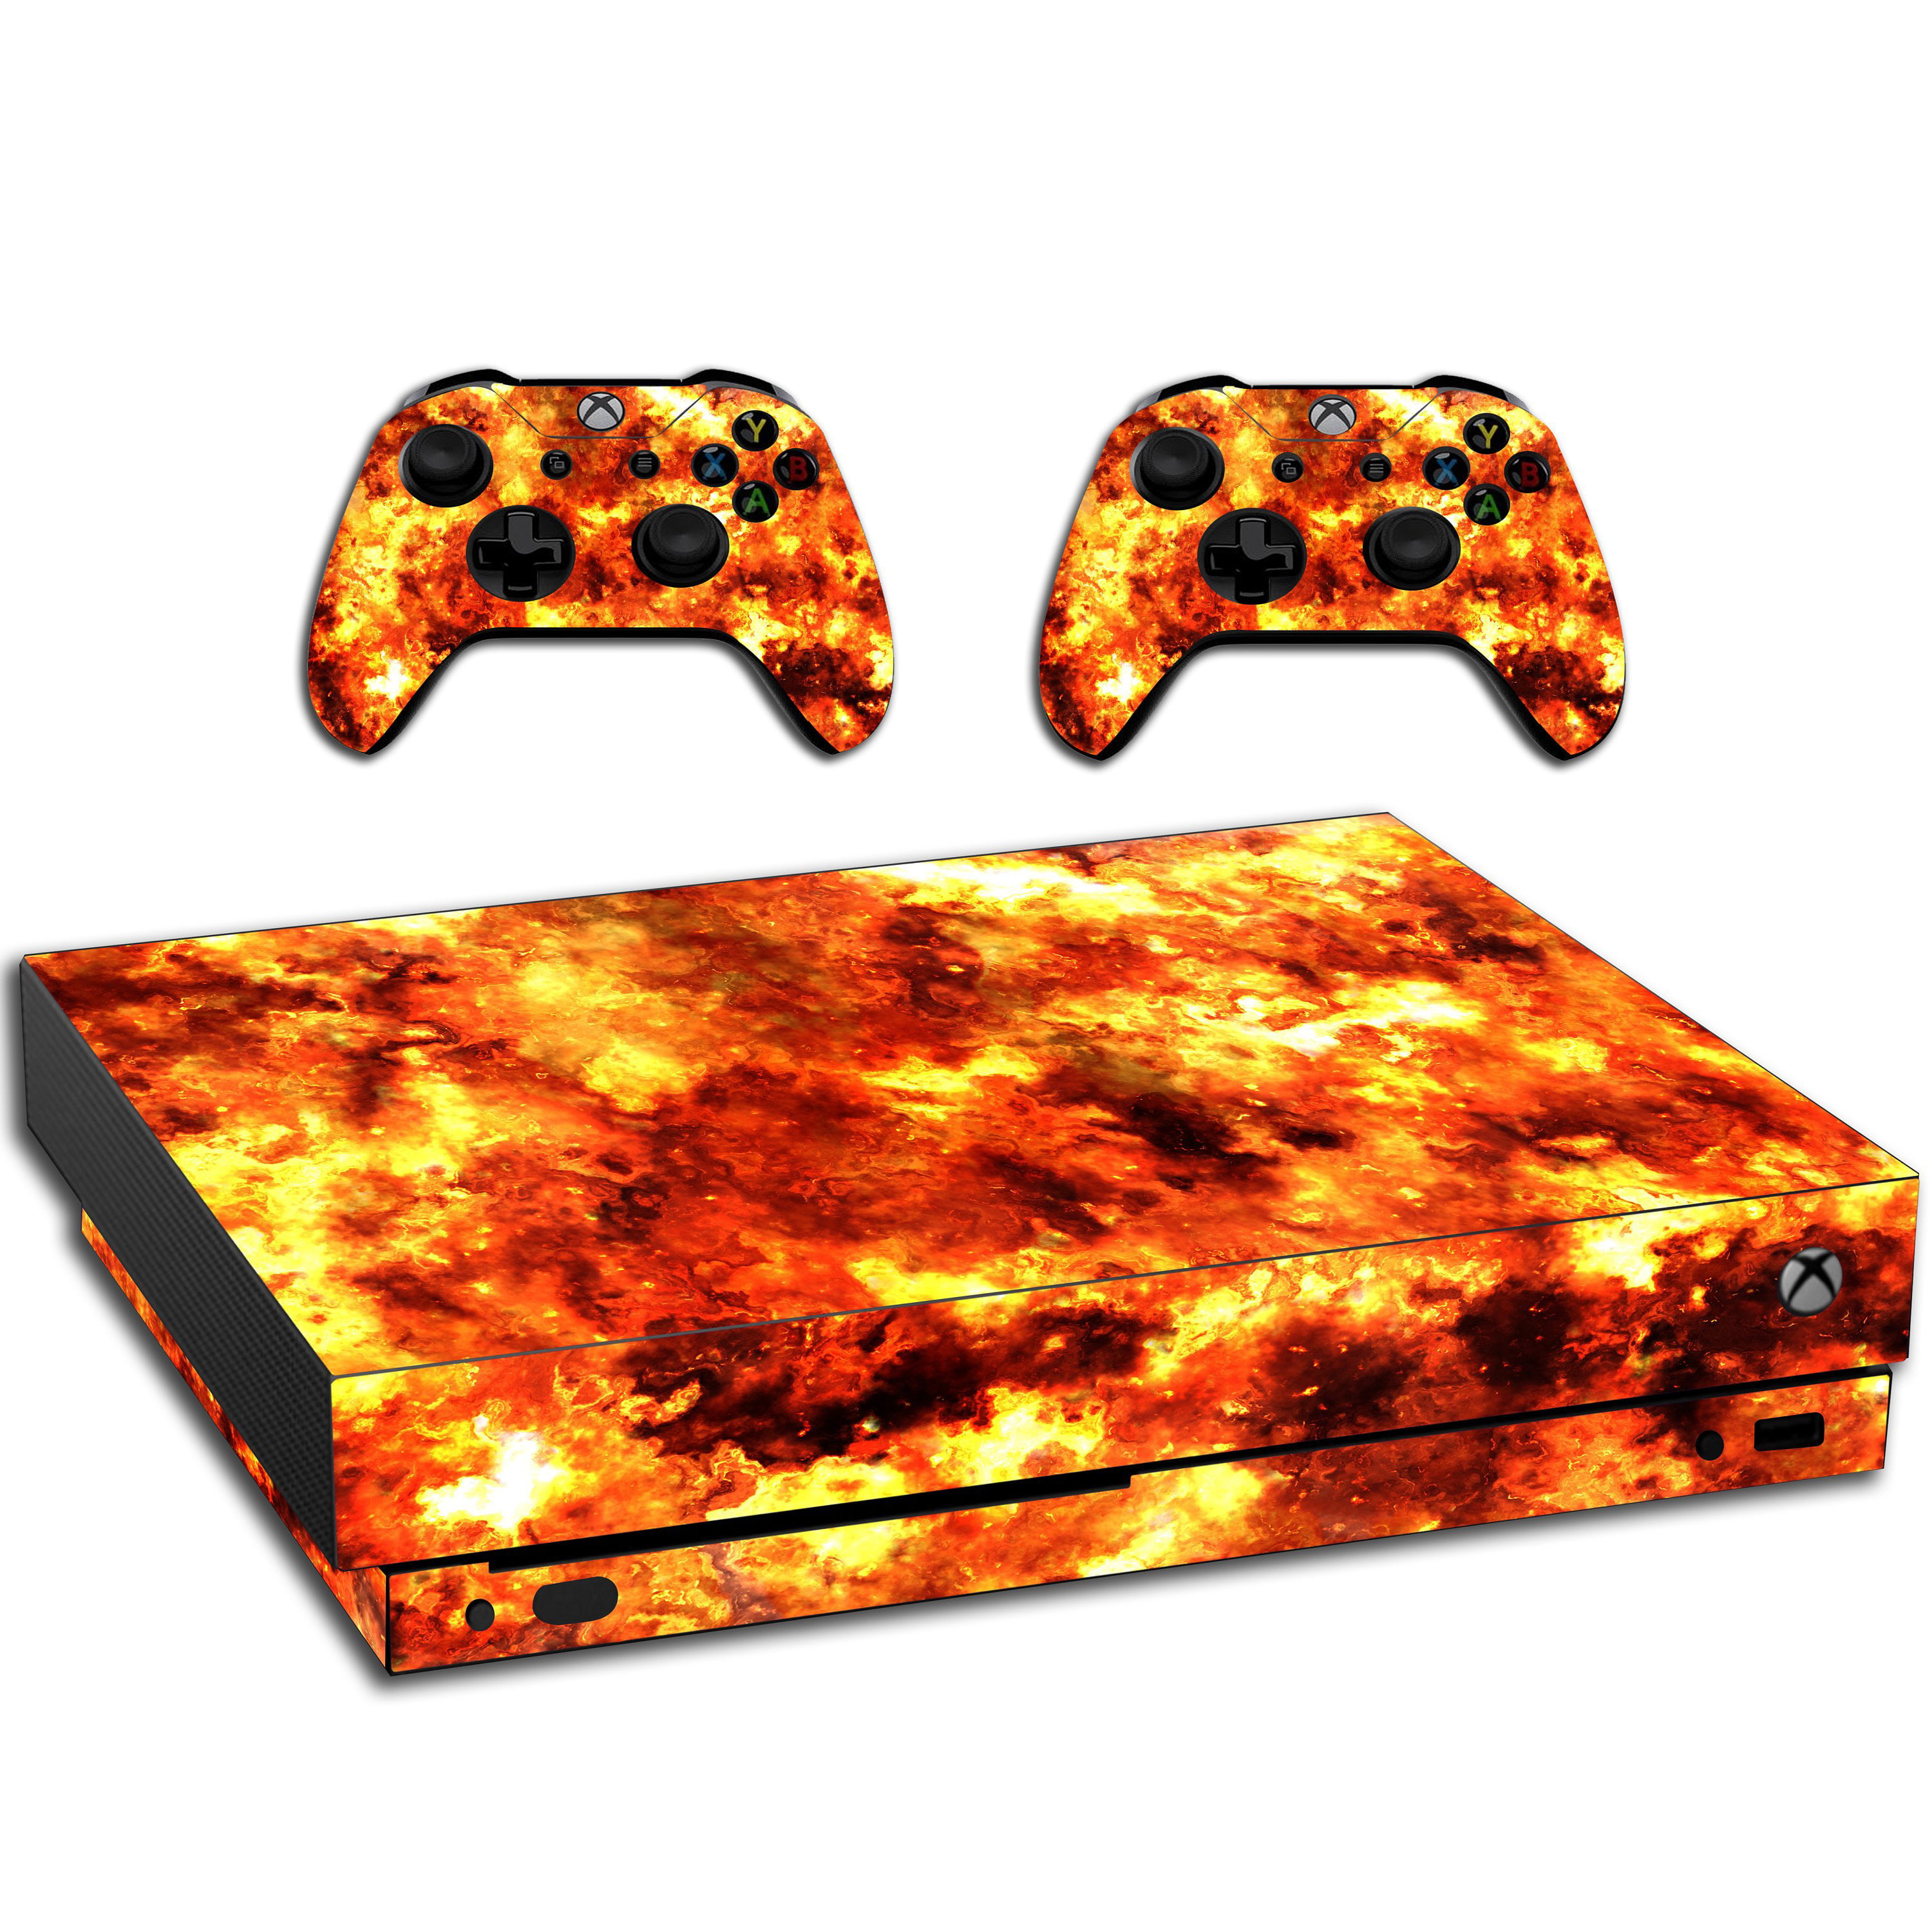 VWAQ Flame Xbox One X Decals For Console And Controllers Fire Skin - XXGC3